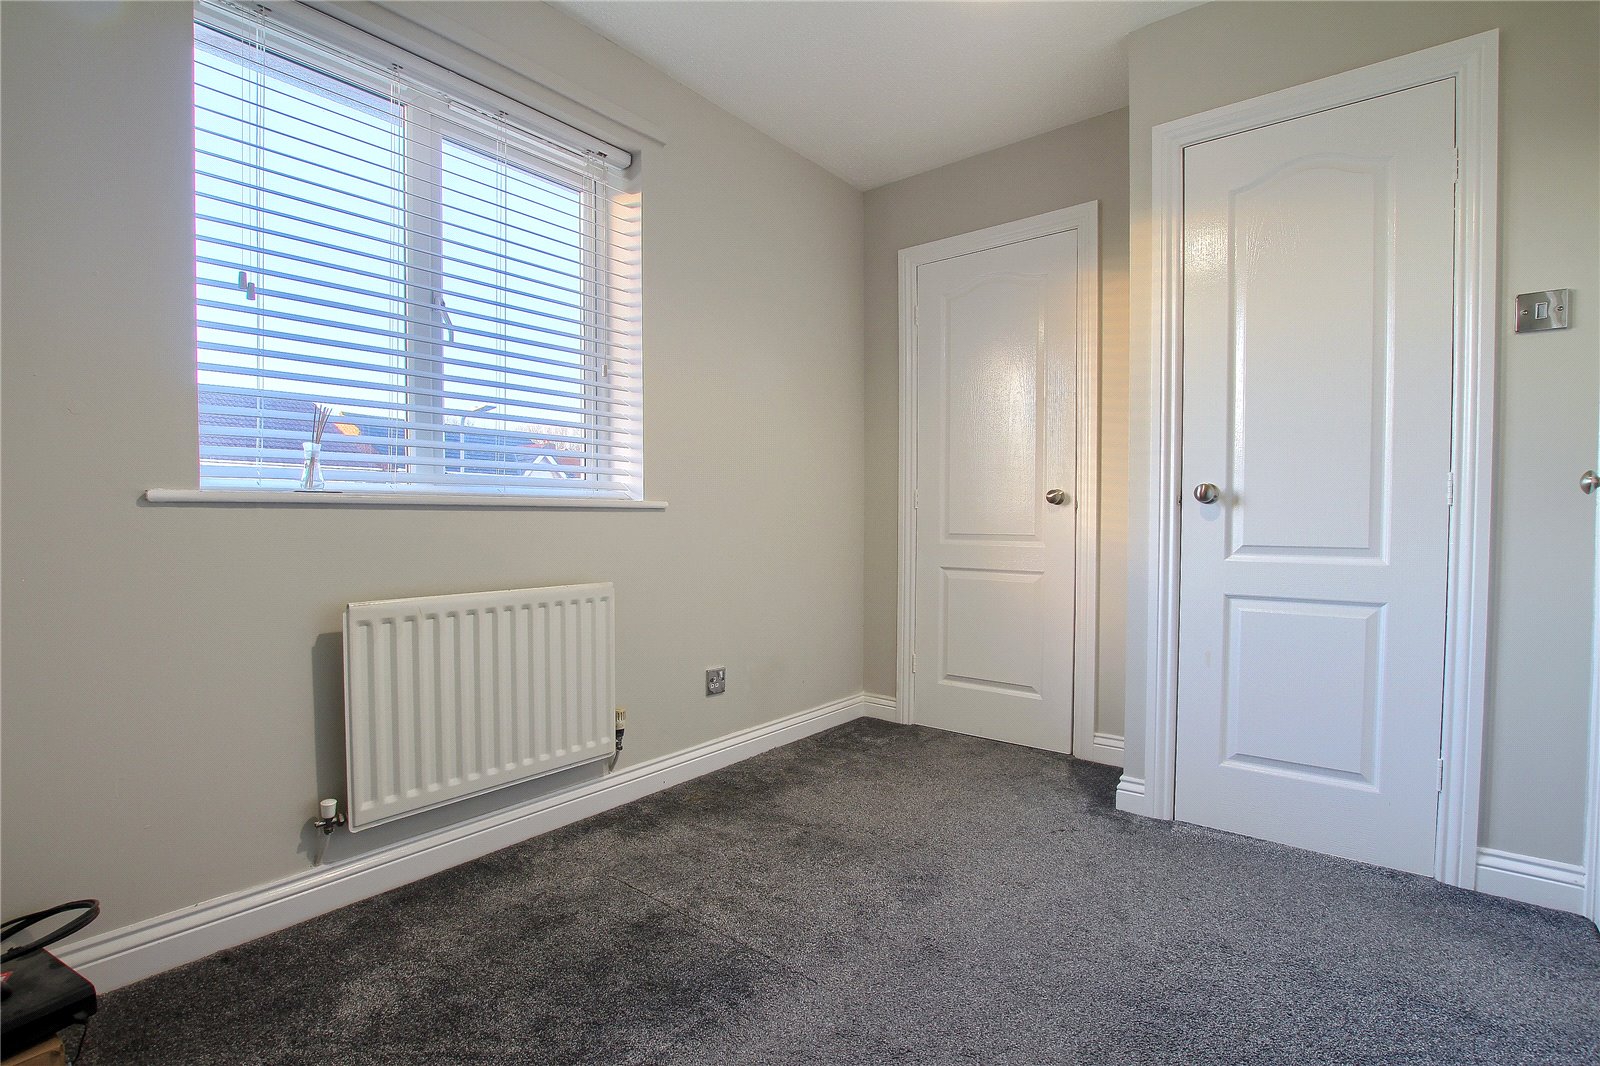 2 bed  for sale in Constable Grove, Wolviston Grange  - Property Image 13